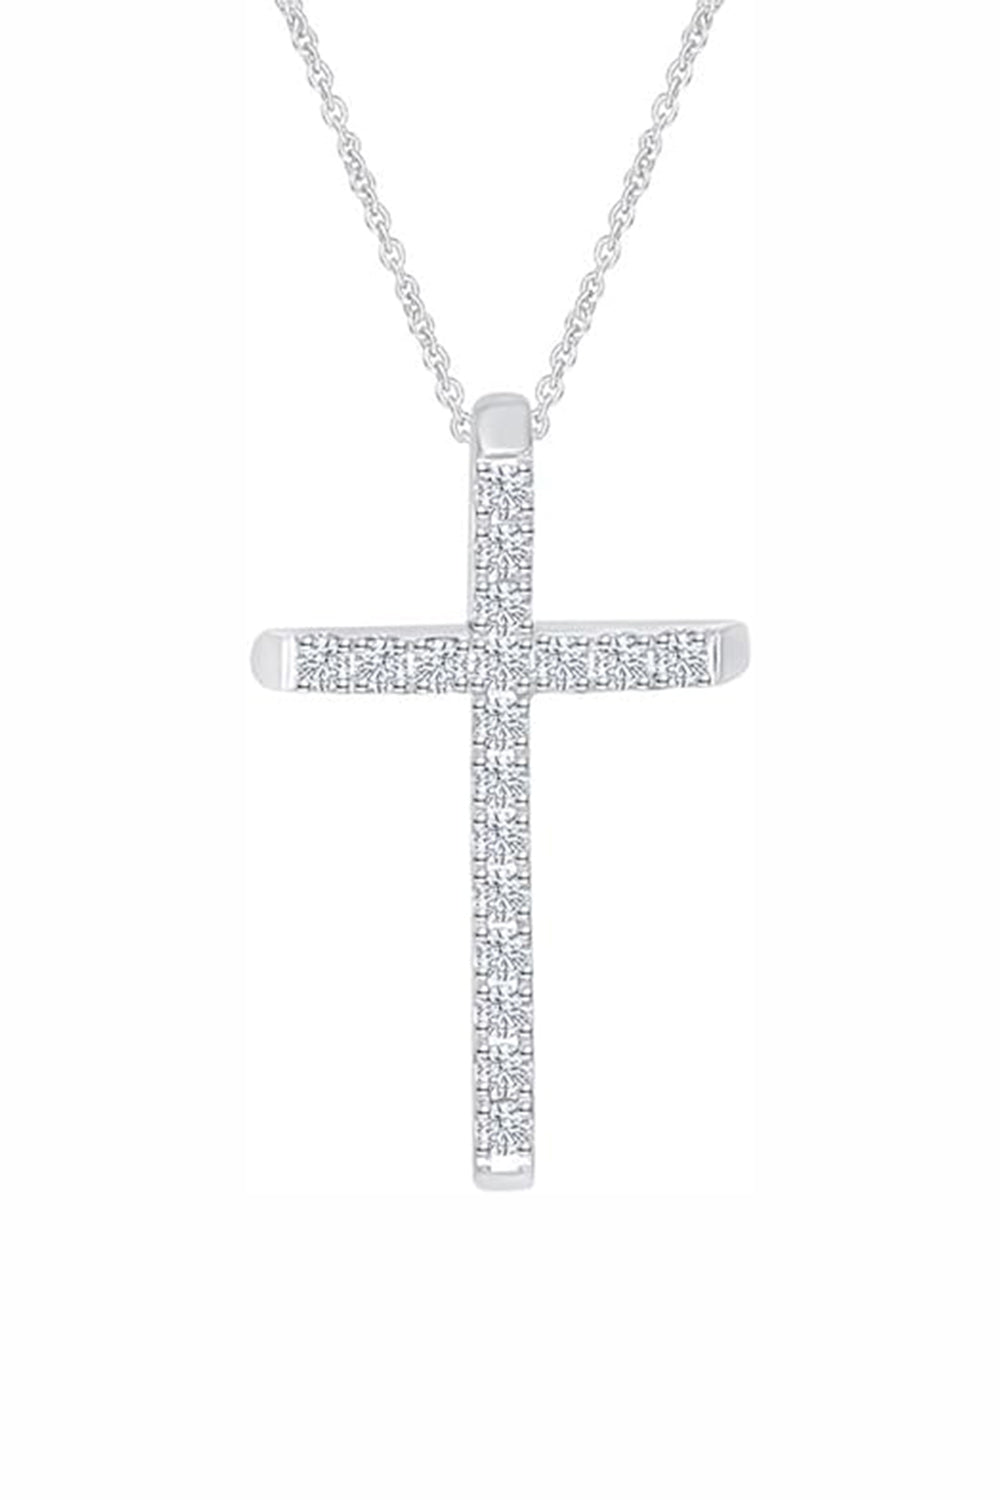 White Gold Color Stylish Cross Pendant Necklace in 18K Gold 